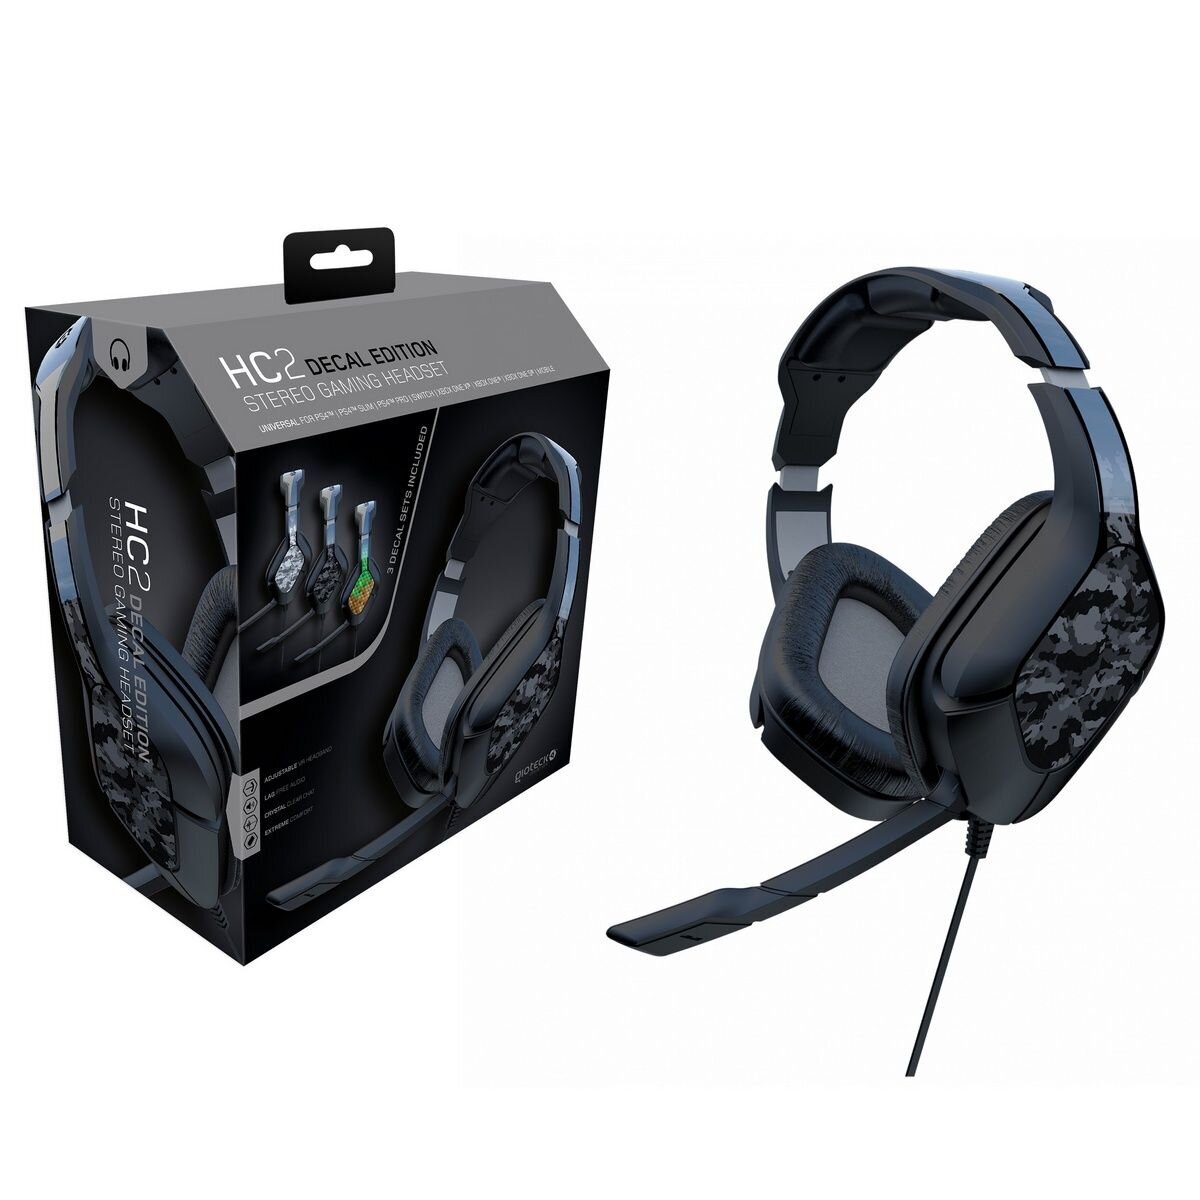 Игровые наушники Gioteck HC2 Stereo Gaming Headset - Decal Edition Camo  (All Consoles, PC) цена | kaup24.ee